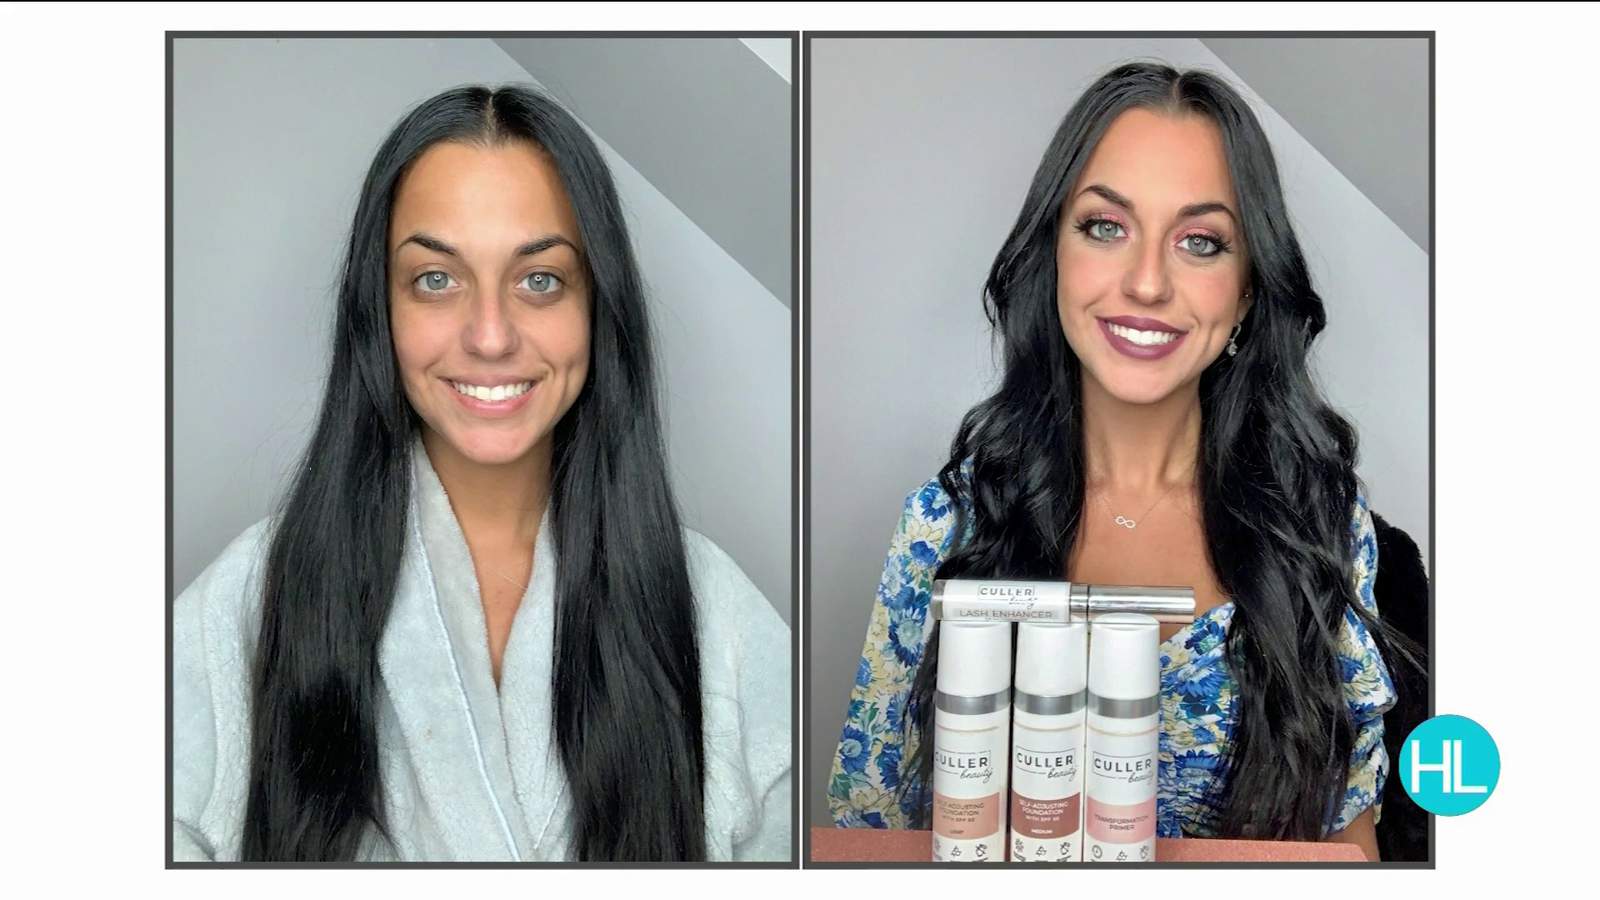 Makeover your beauty routine with this self-adjusting color foundation